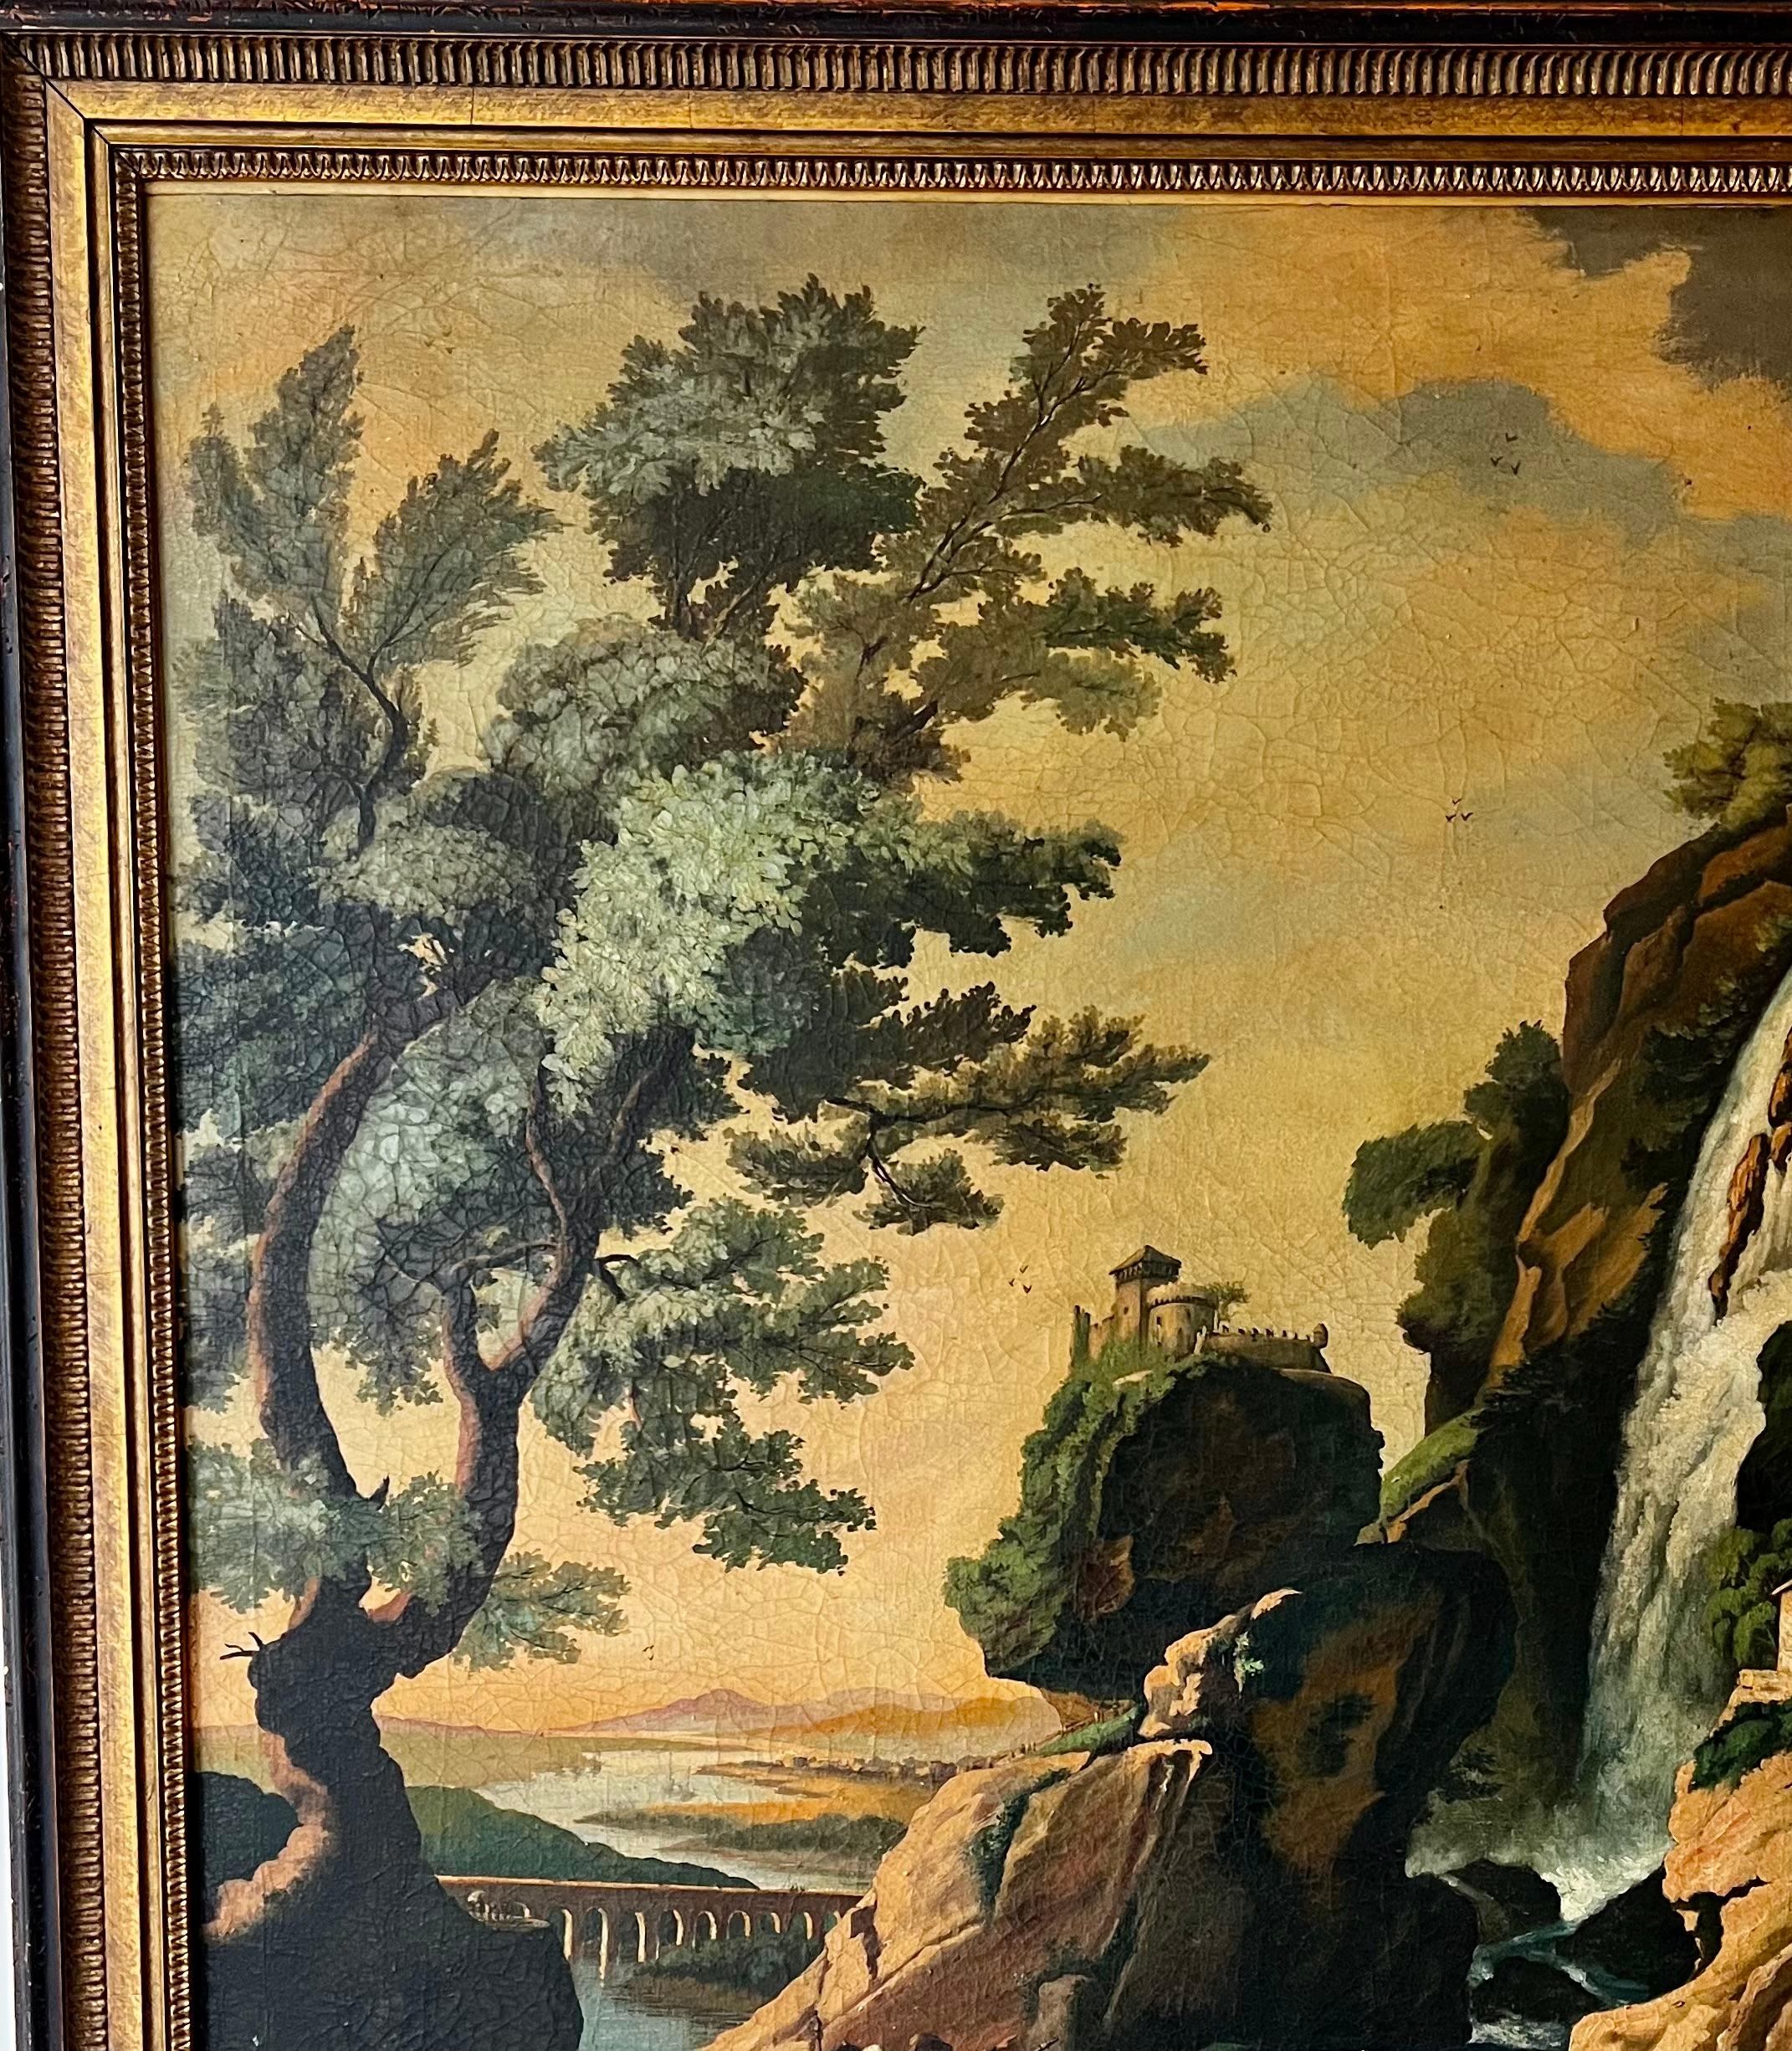 Early 20th Century Landscape with Figures - Painting by Continental School